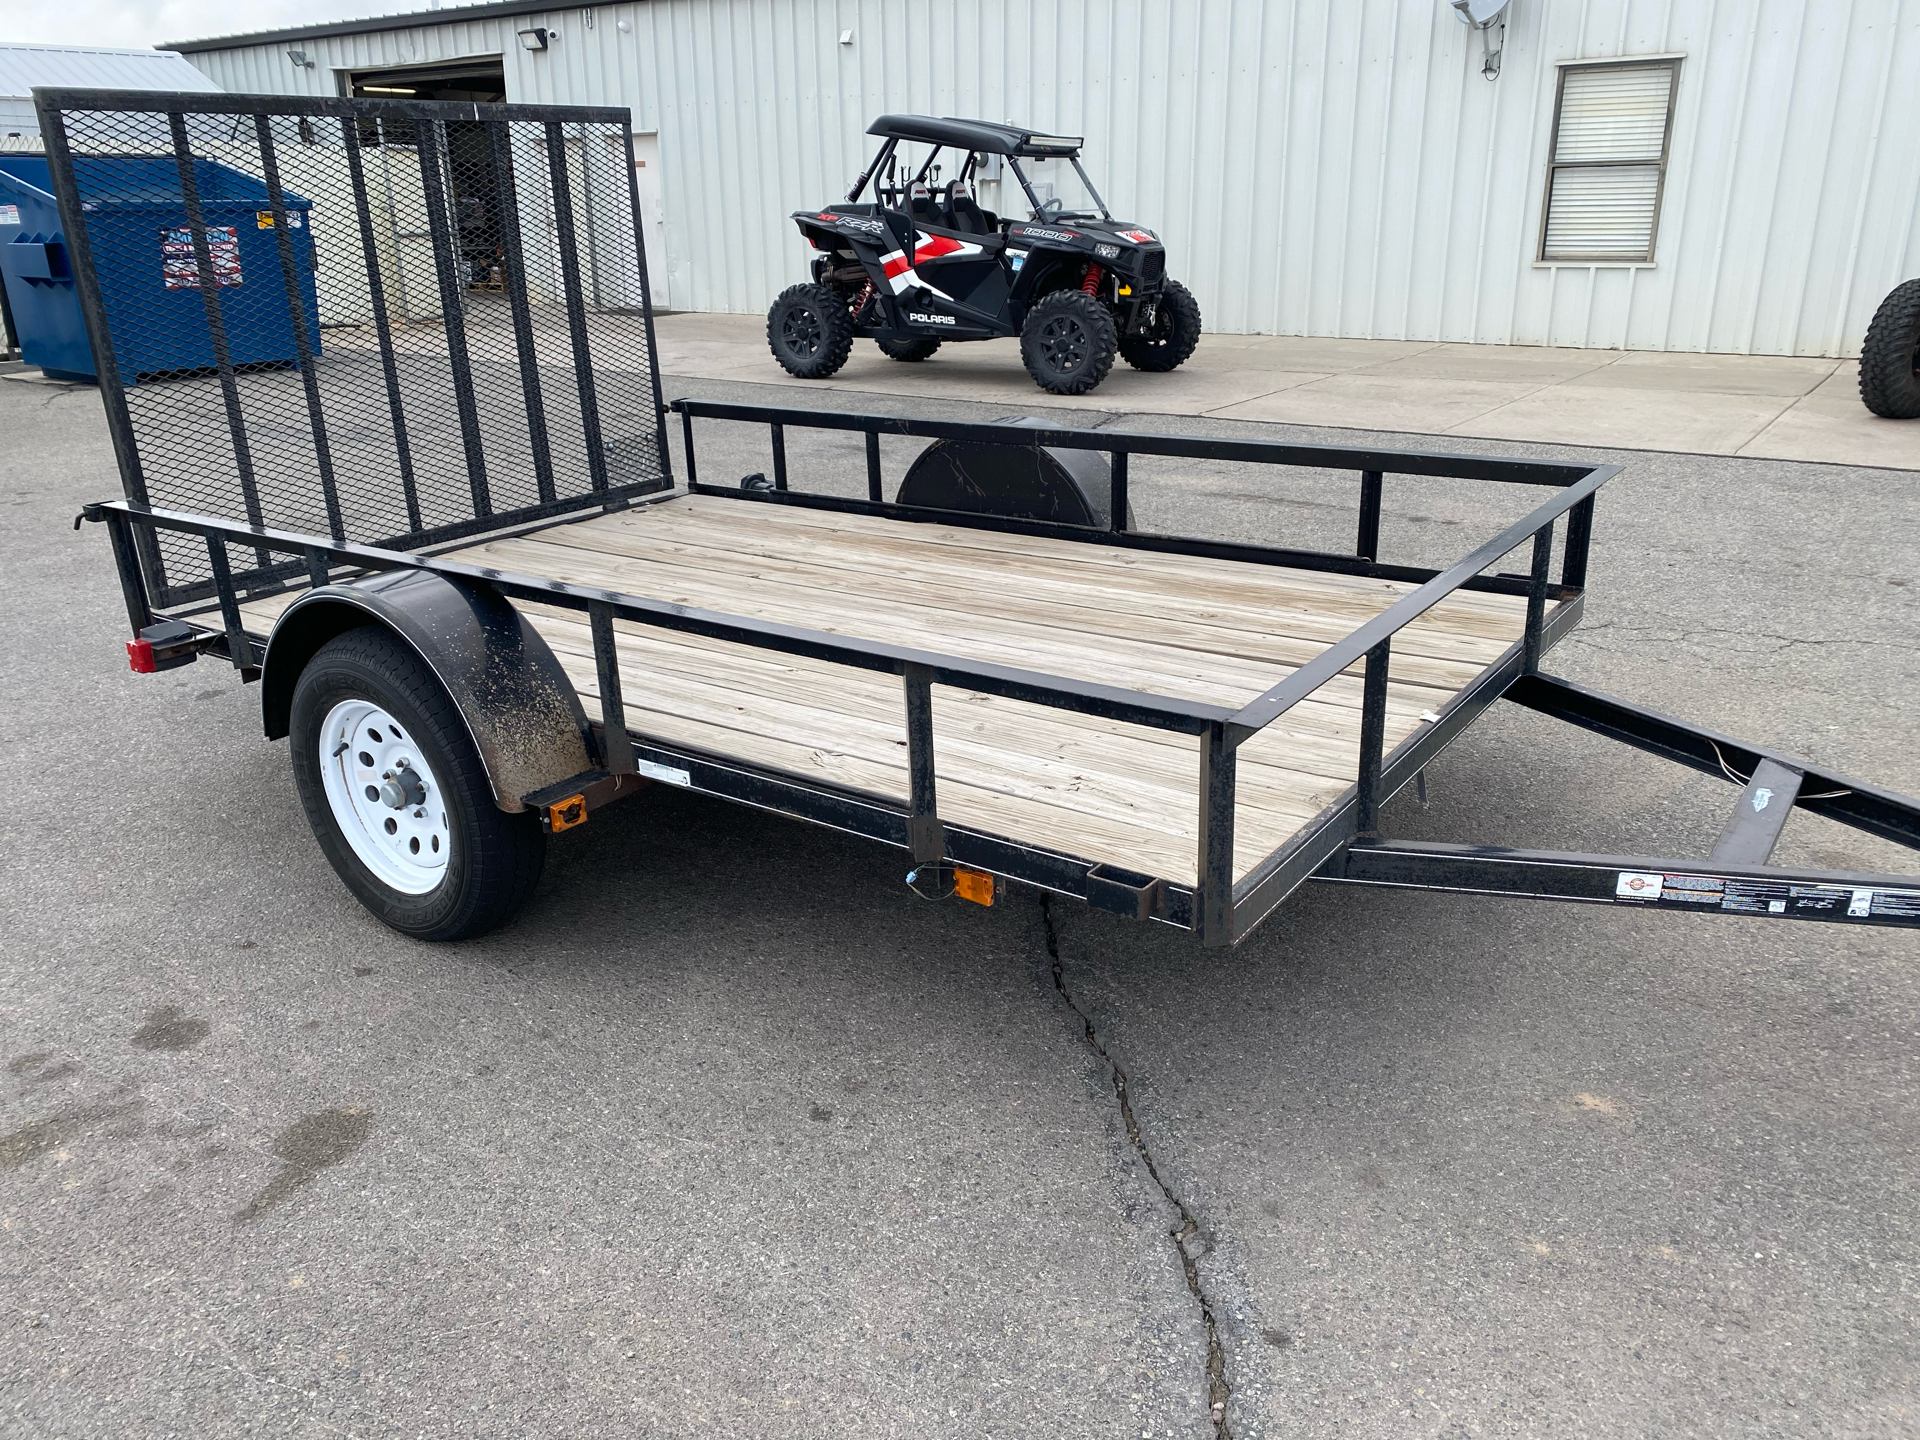 2015 Carry-On Trailers 6X10CG in Alamosa, Colorado - Photo 1